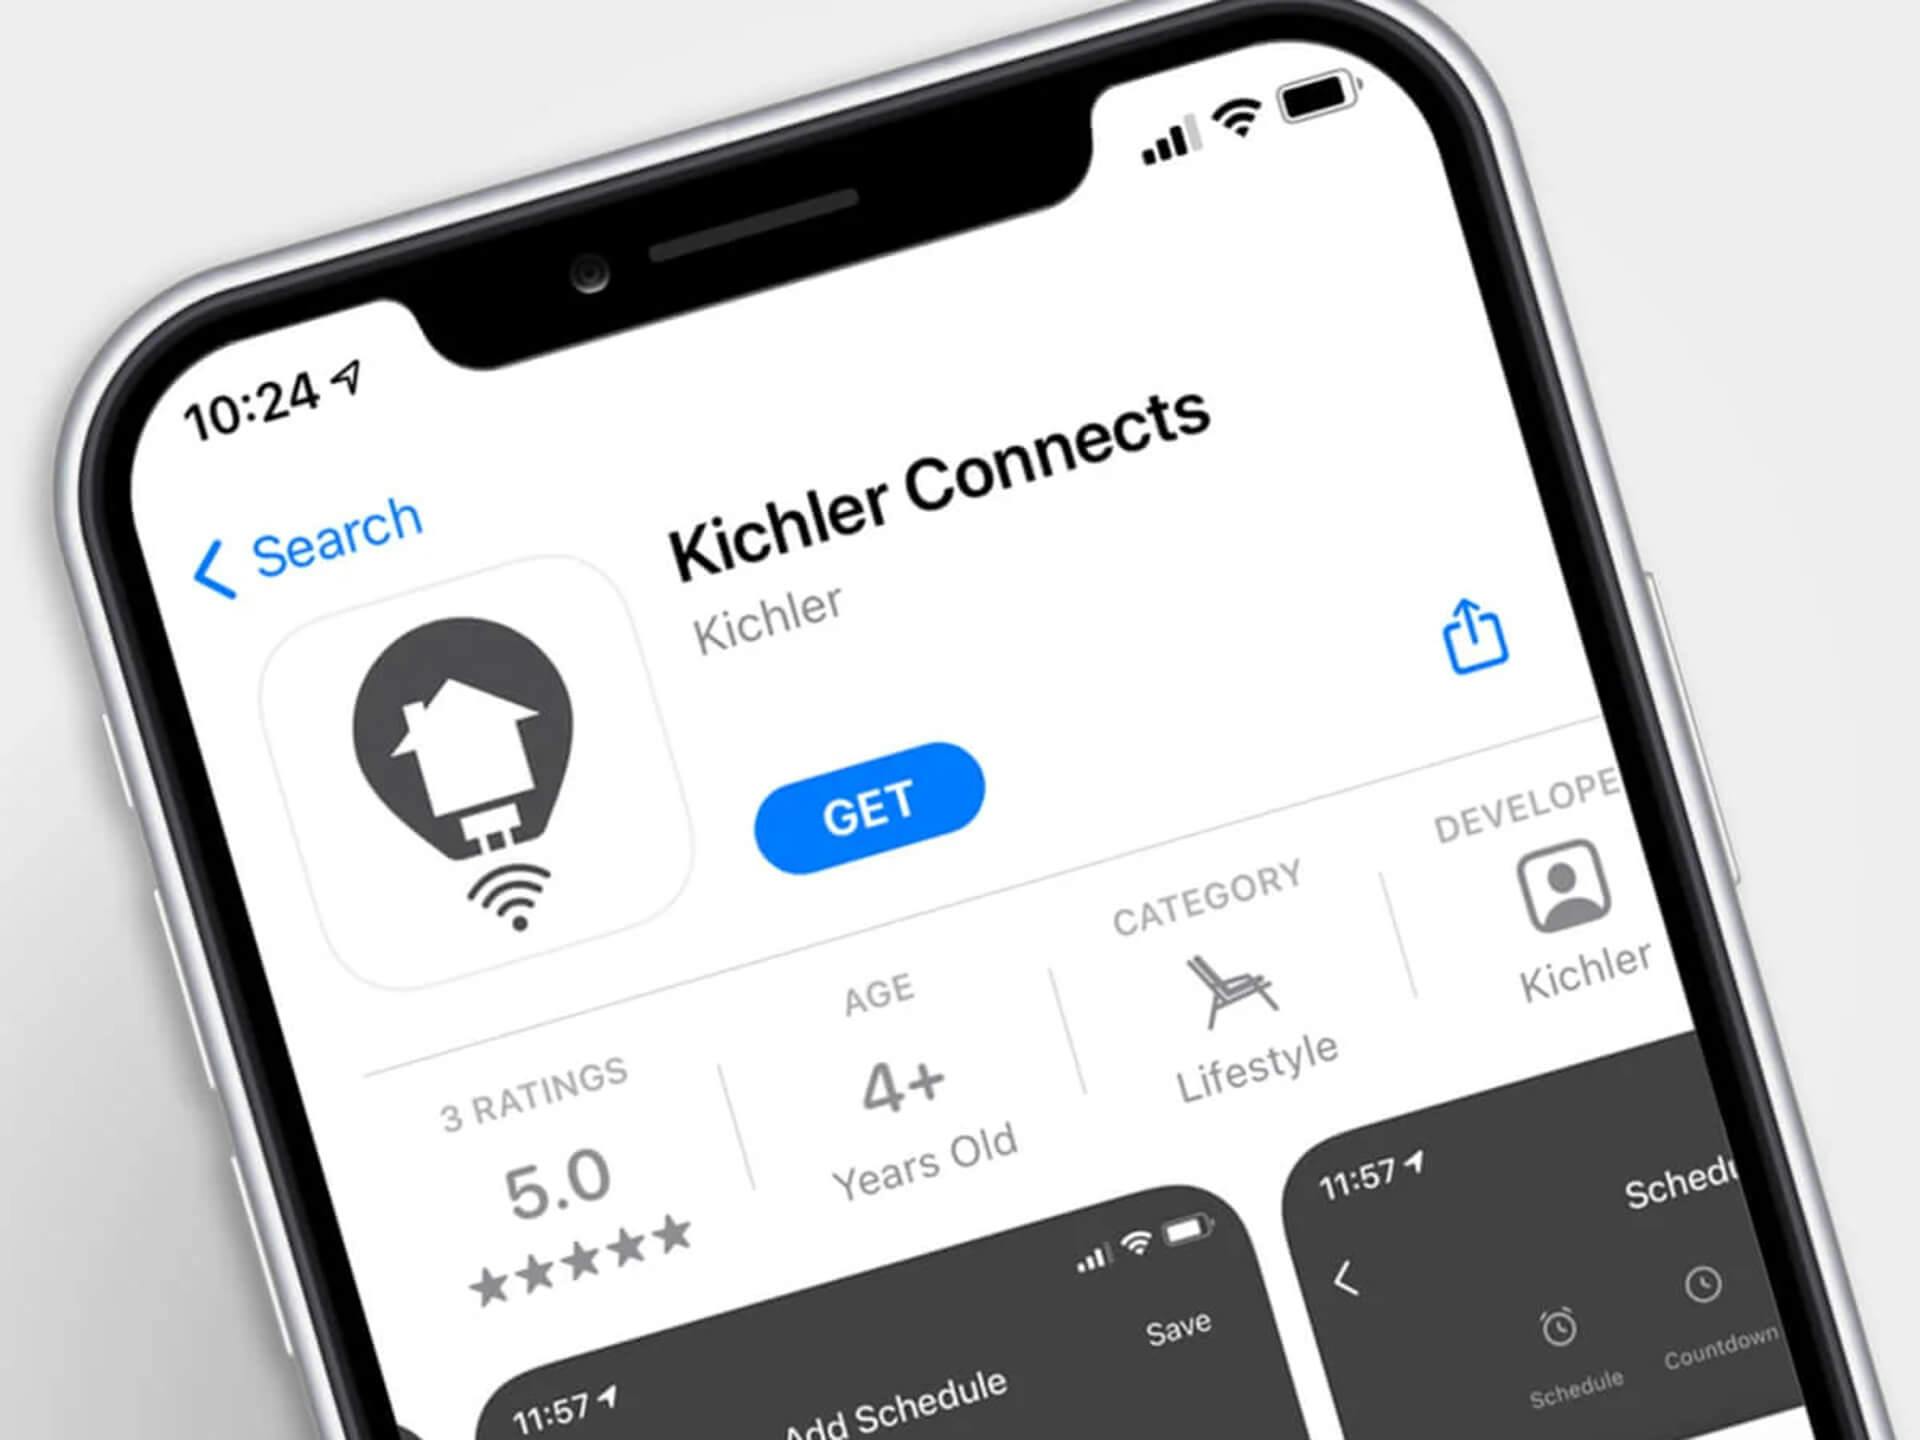 Listing for Kichler Connects on the Apple App Store